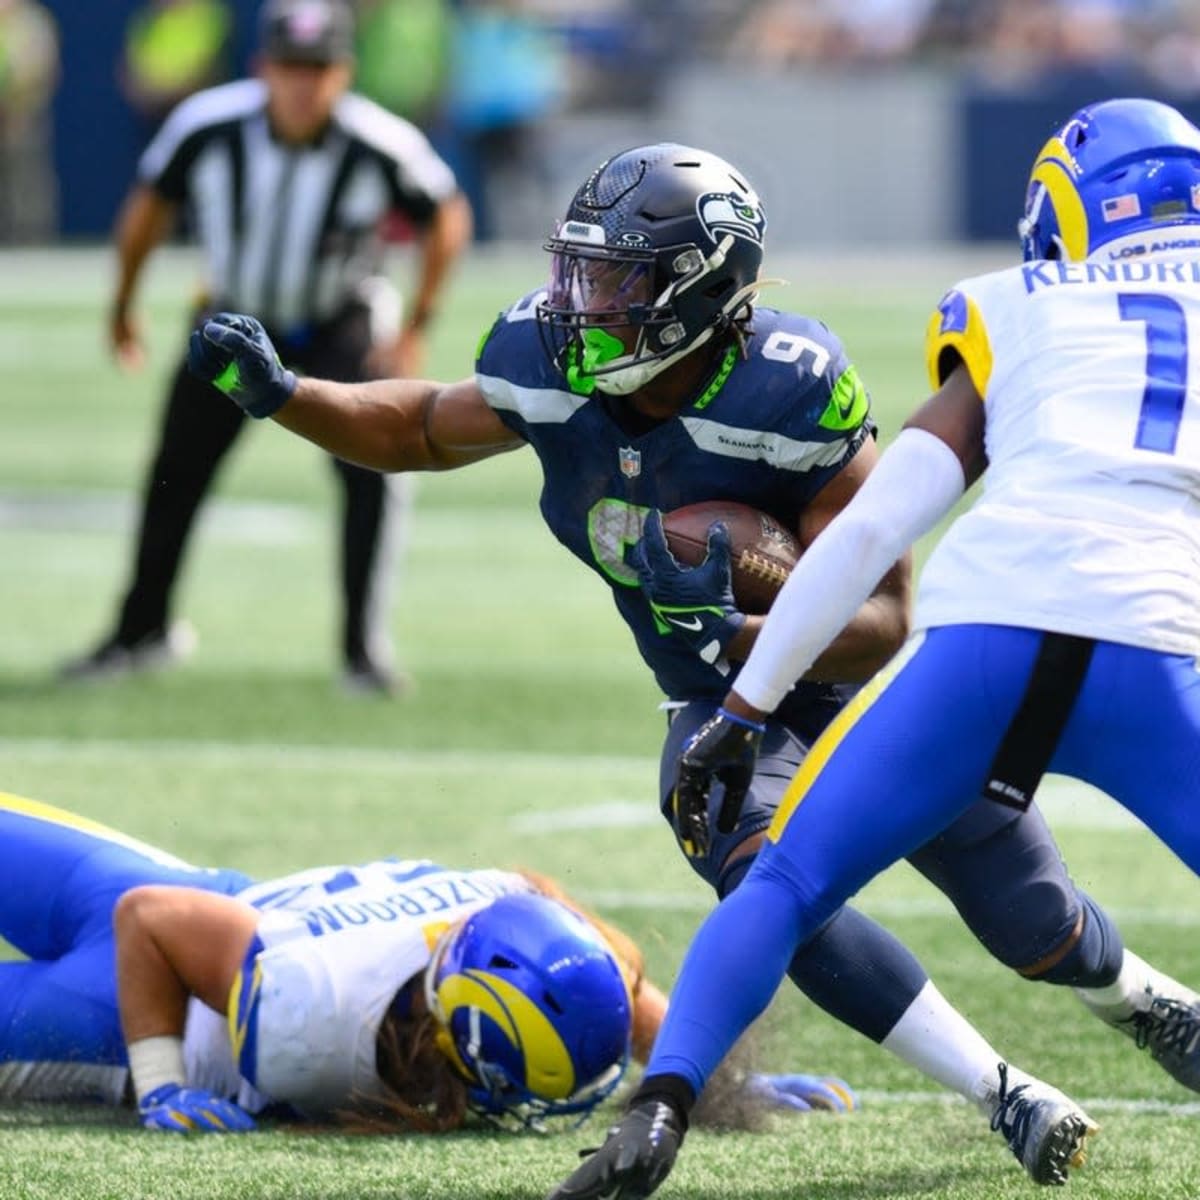 Rams vs. Seahawks live stream: TV channel, how to watch